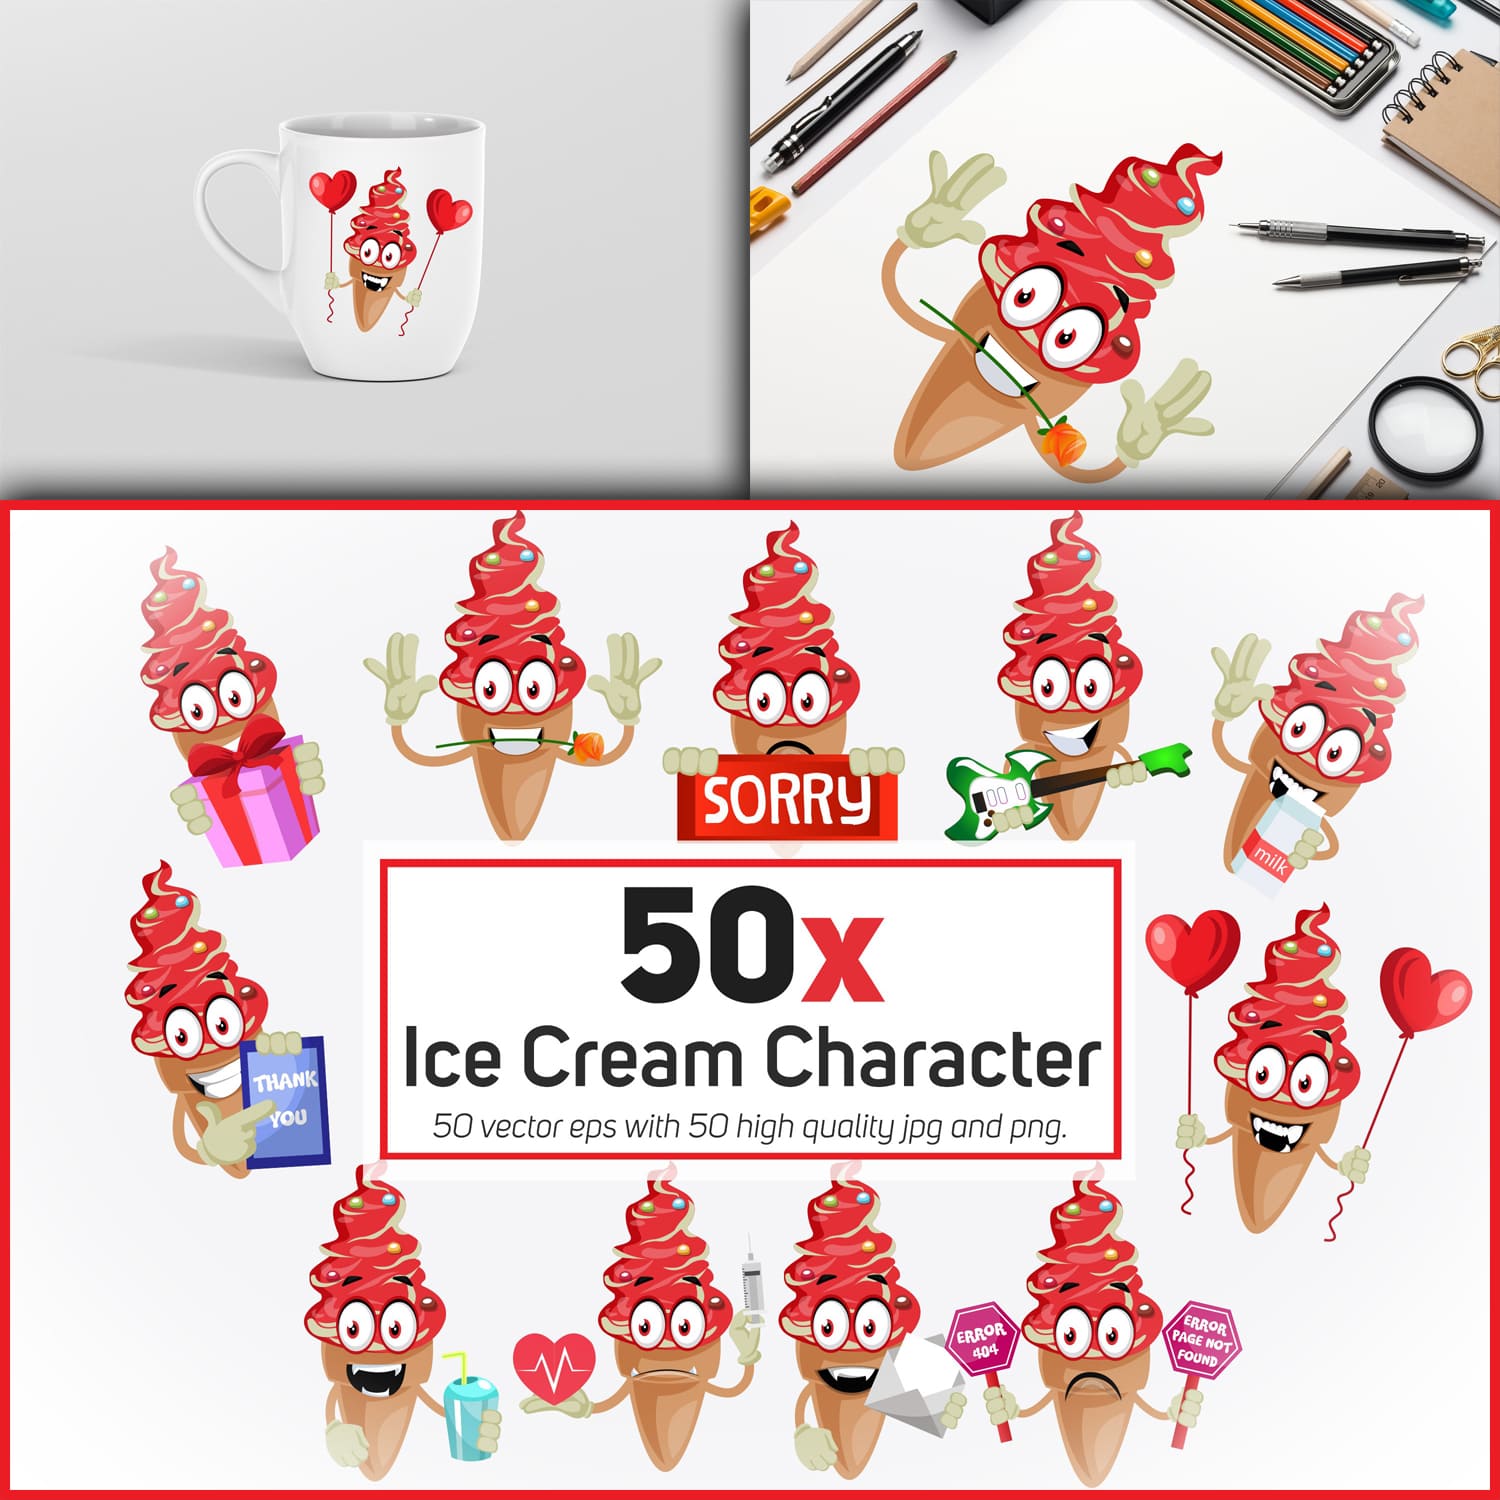 50x Ice Cream Character collection illustration. cover.